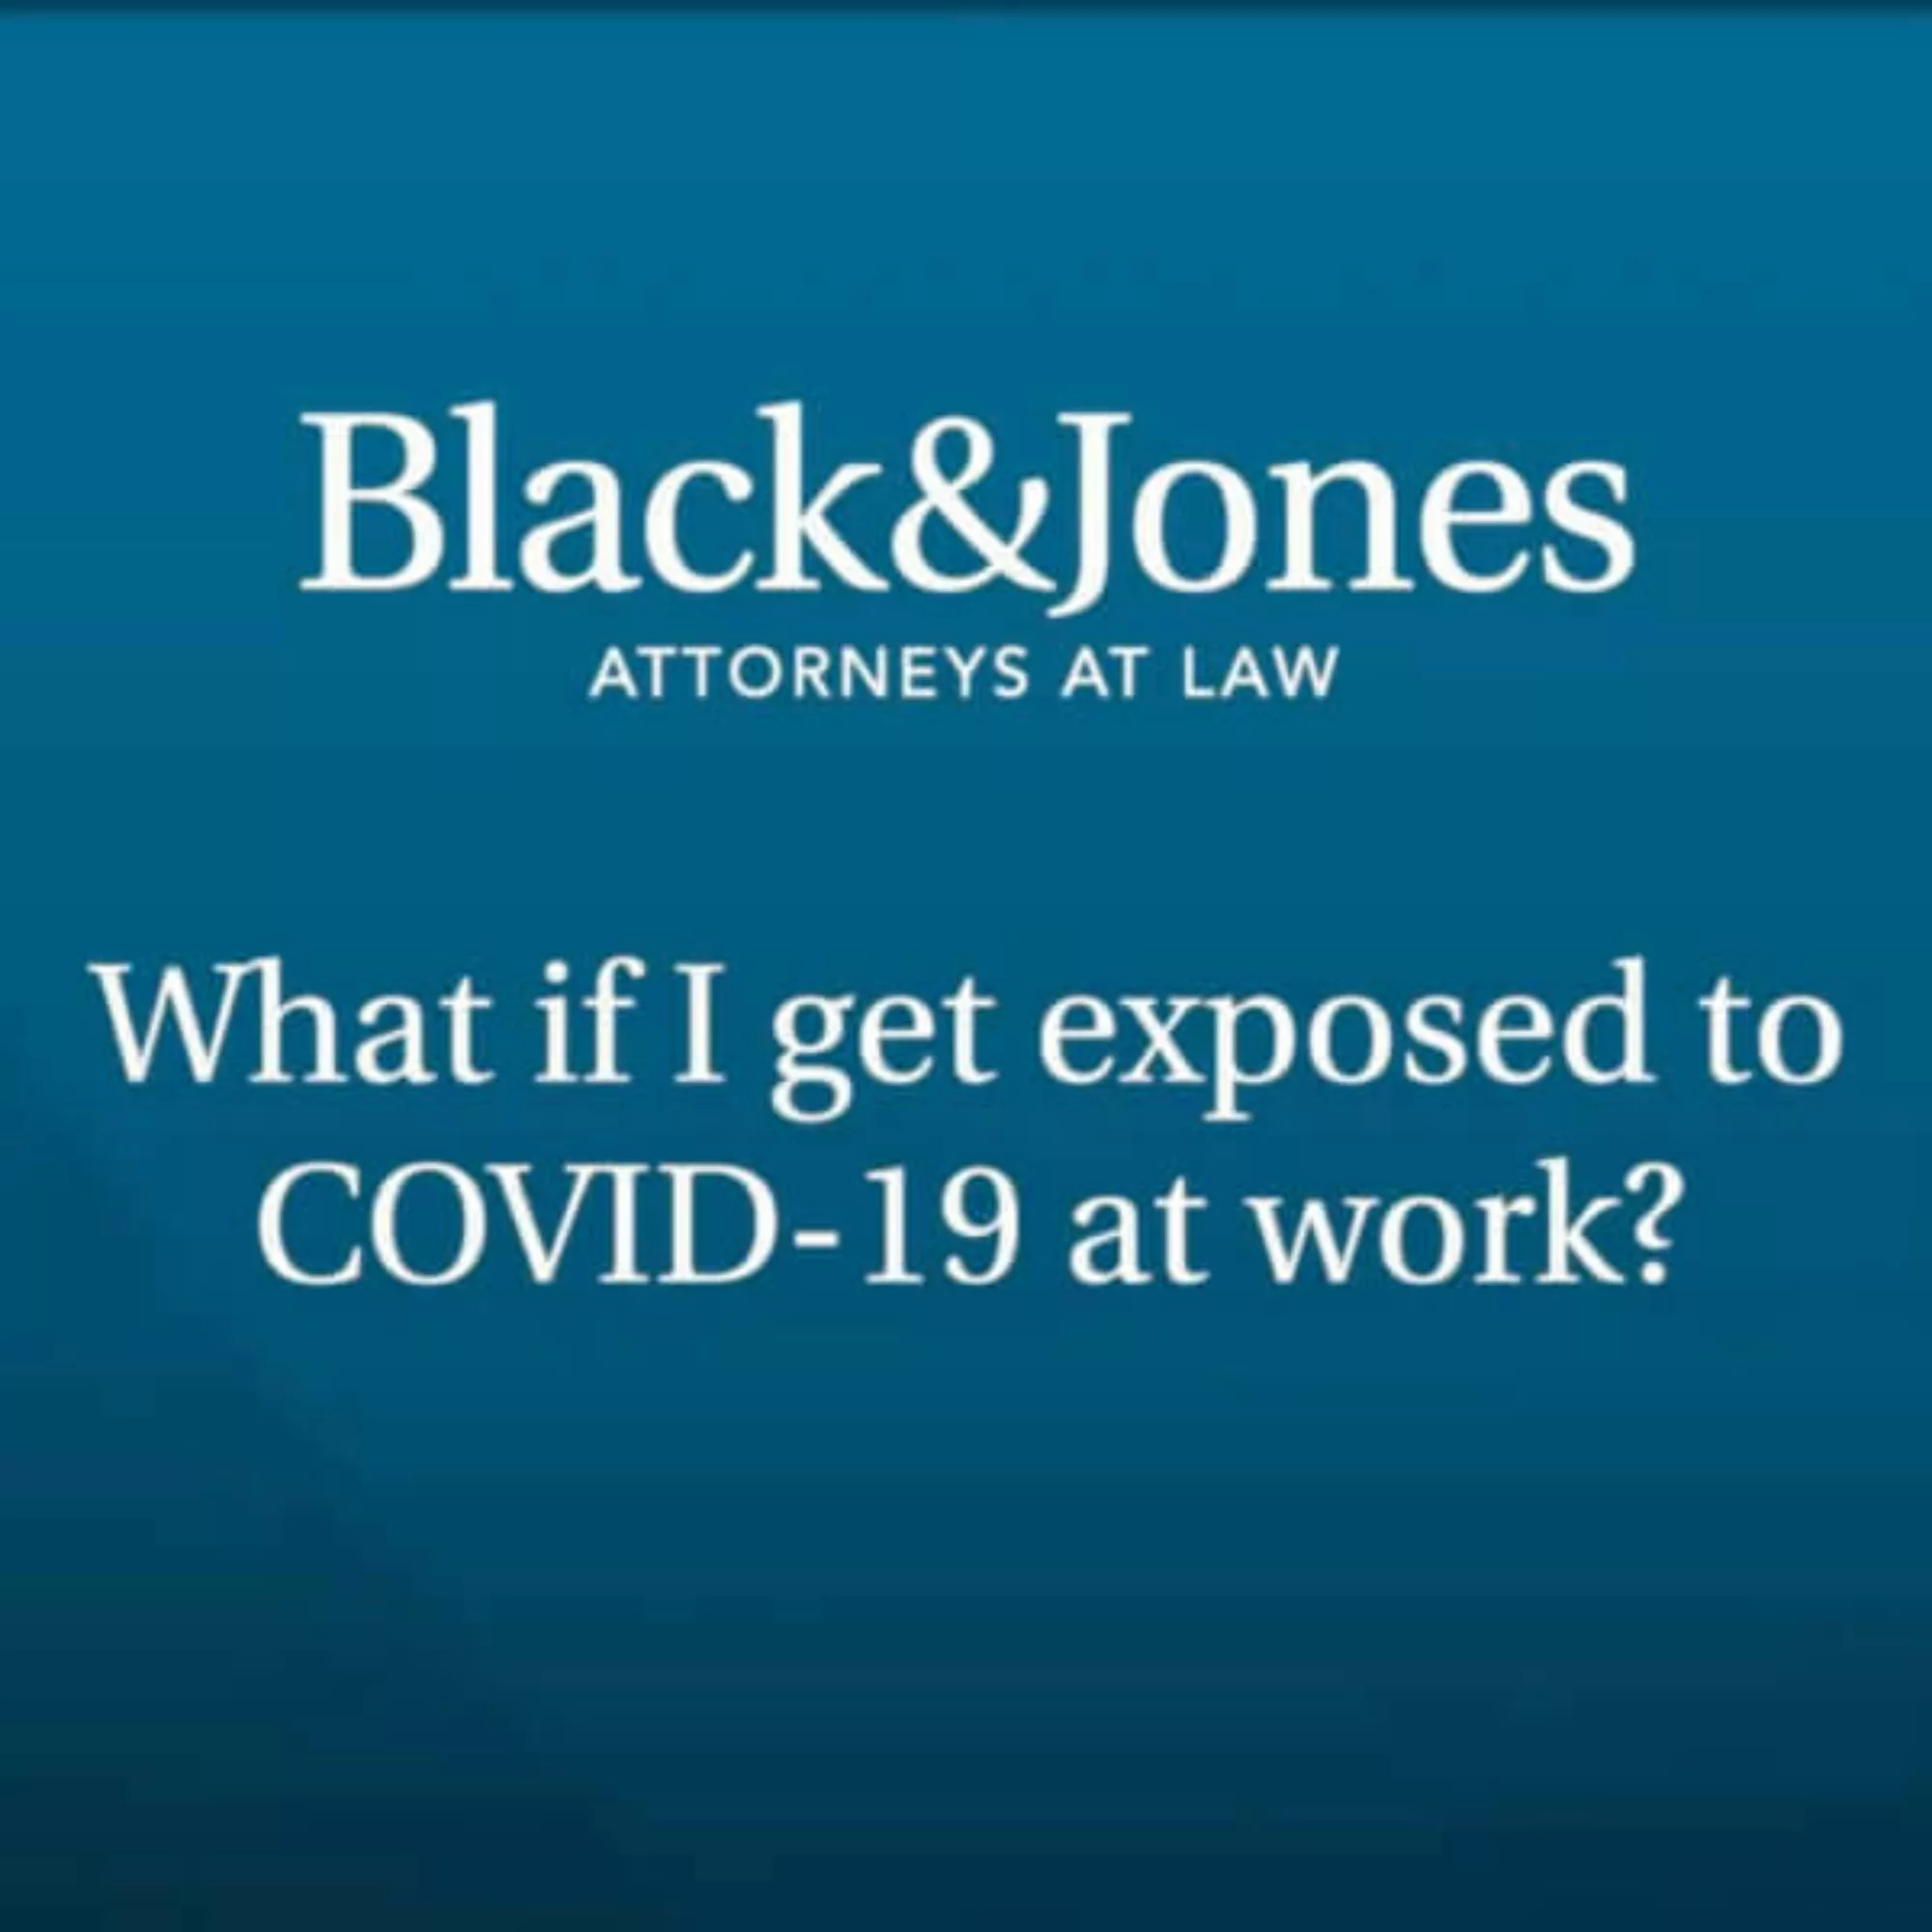 Text, "What if I get exposed to COVID-19 at work?"